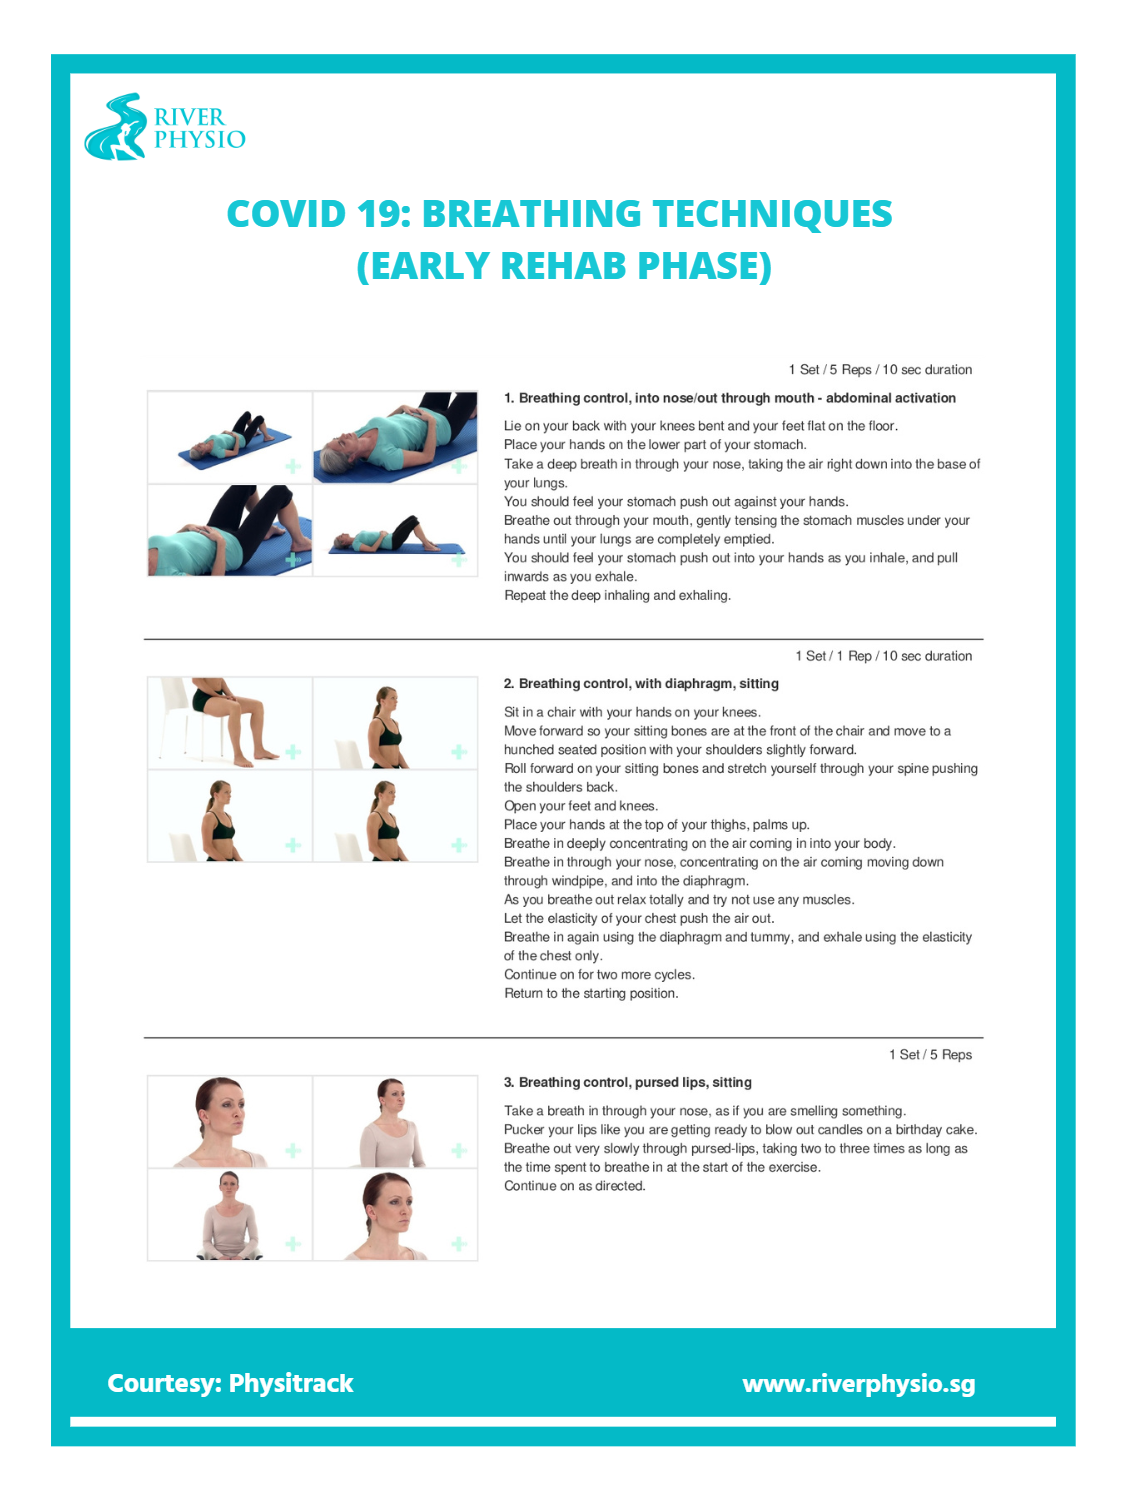 Physiotherapy, Covid19, Breathing, Health